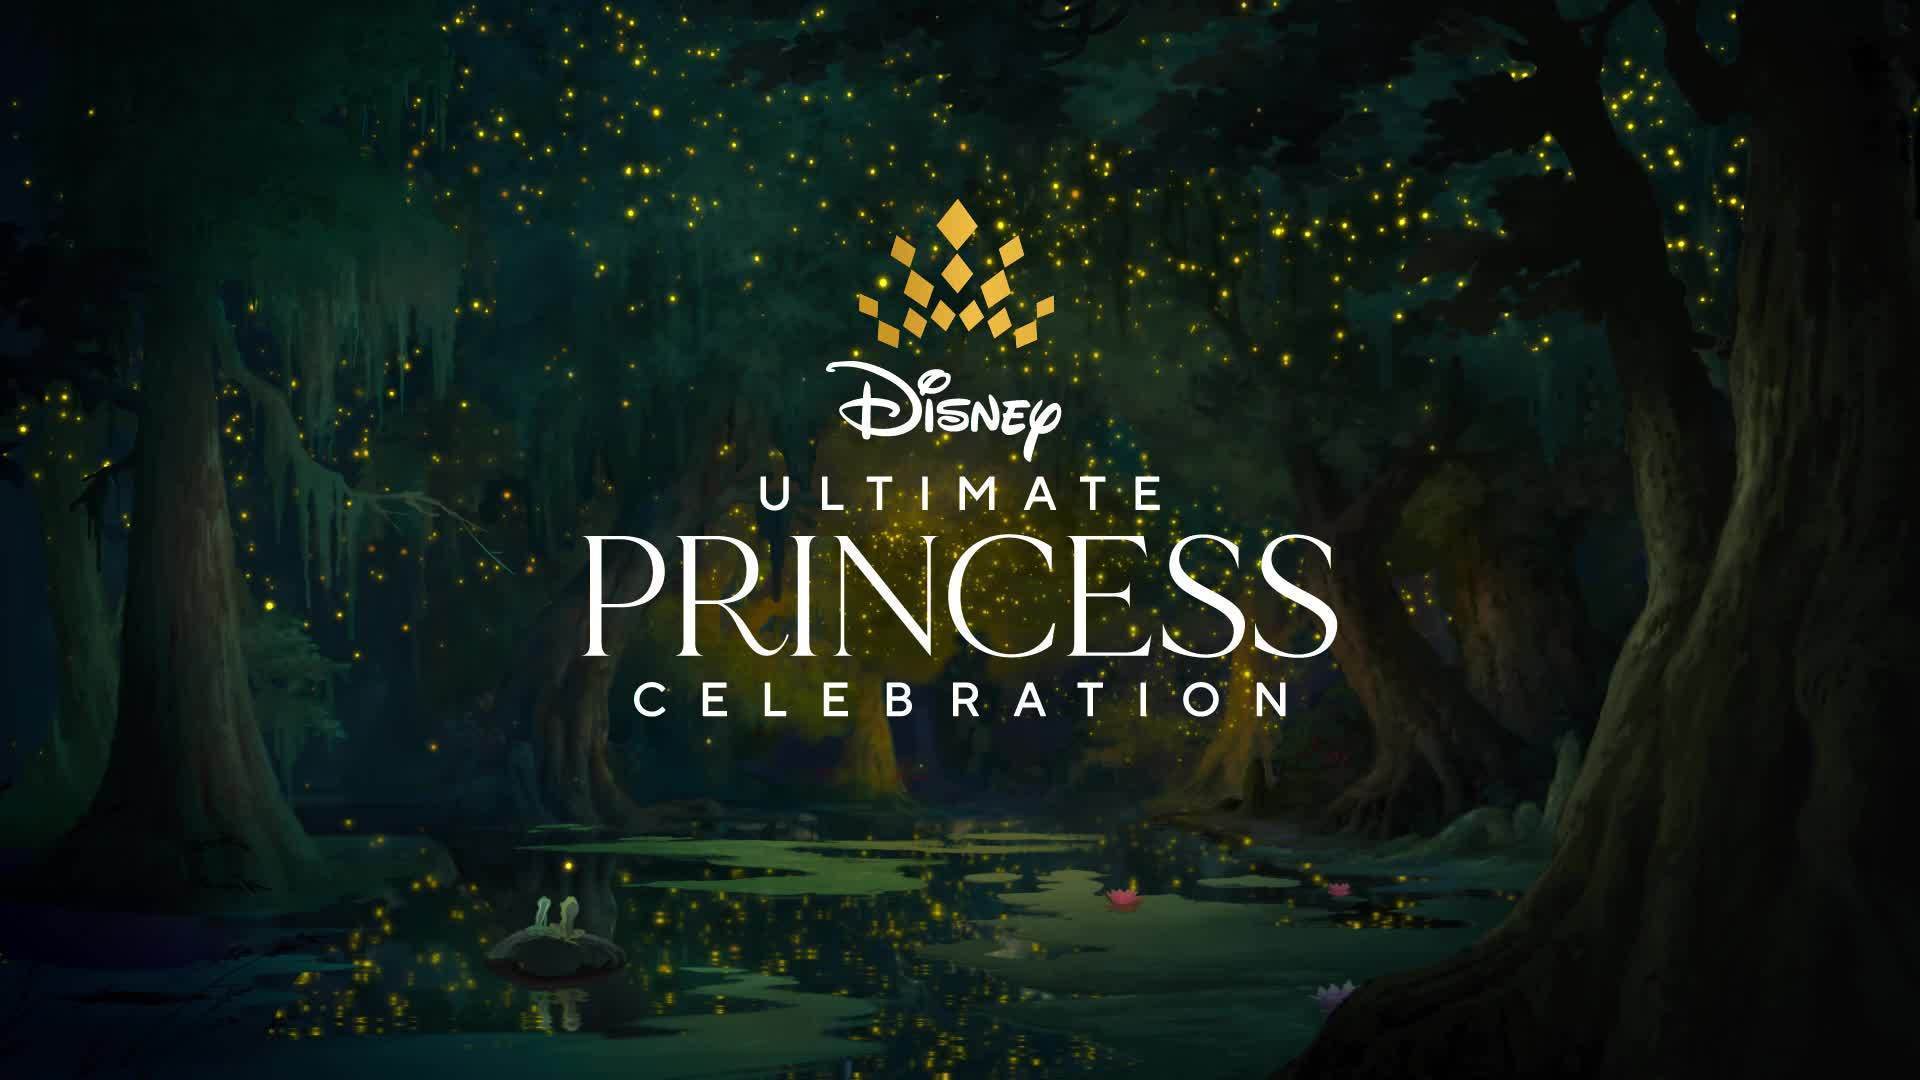 Celebrate Courage and Kindness During Disney’s Ultimate Princess Celebration